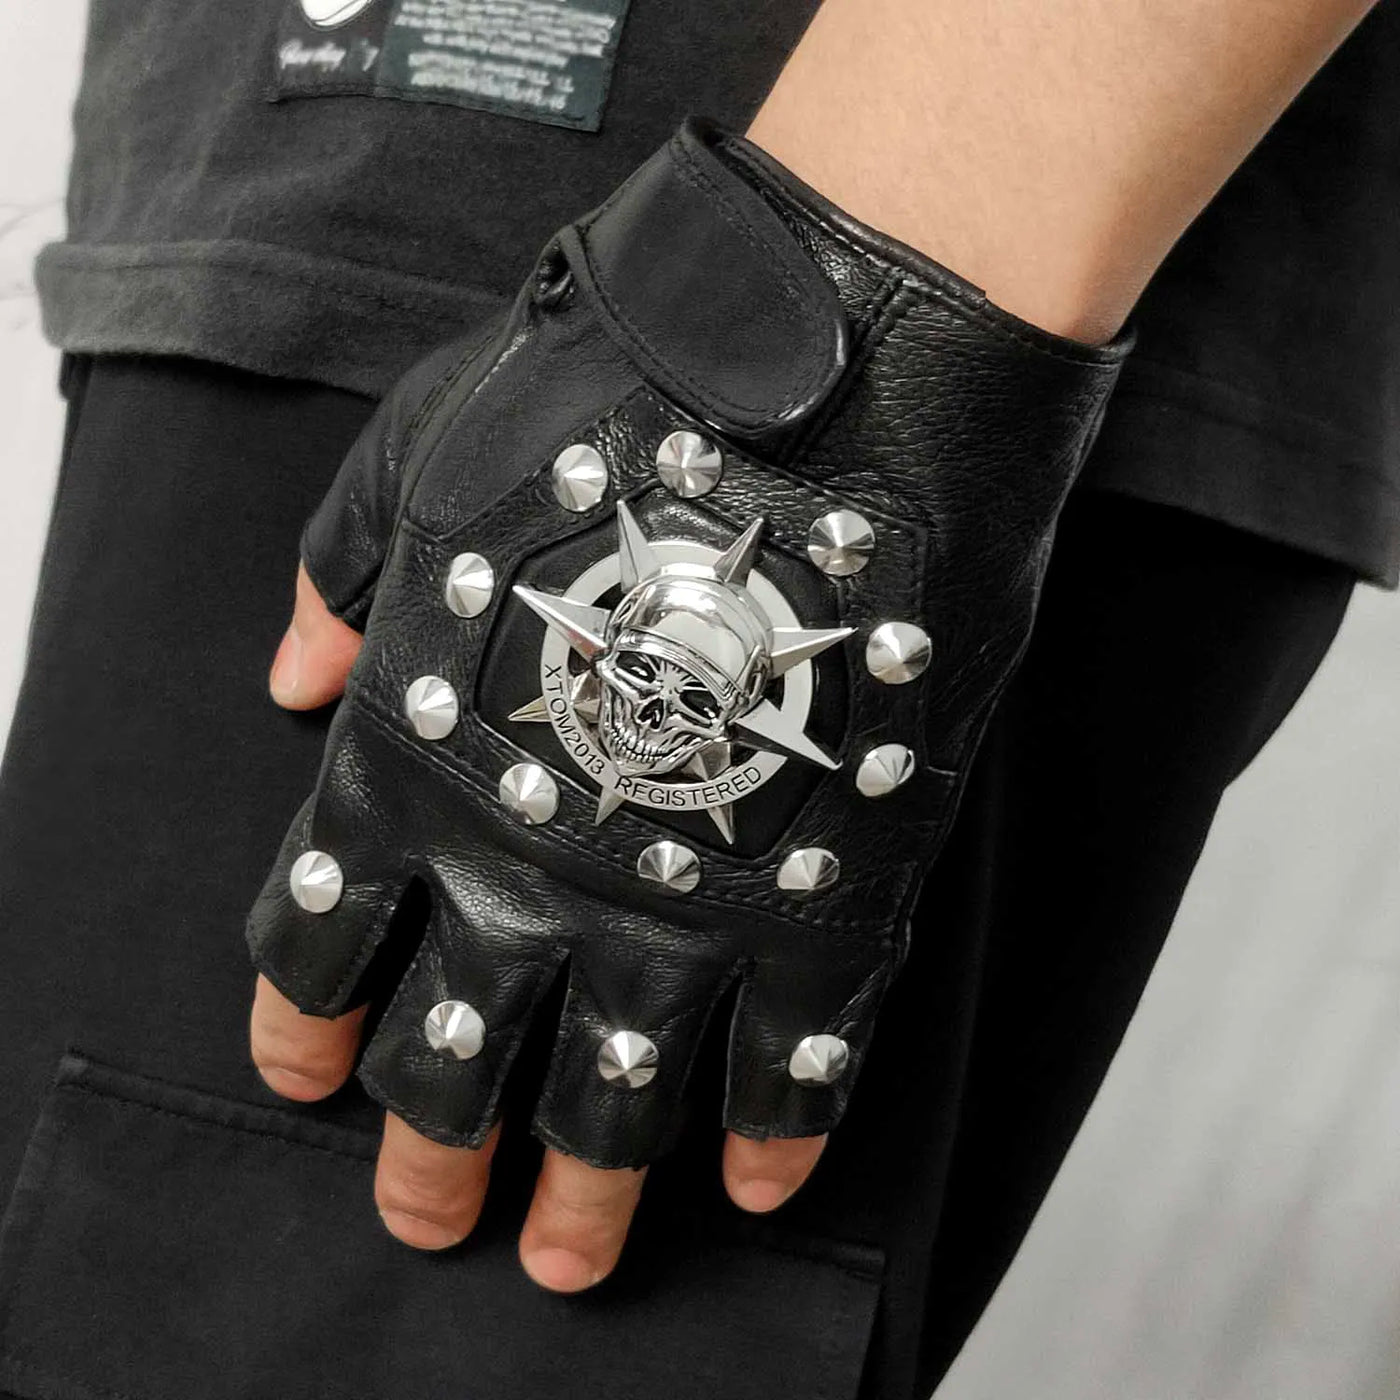 A man wearing a pair of Men's Skull Steampunk Biker Leather Gloves with studs on them.